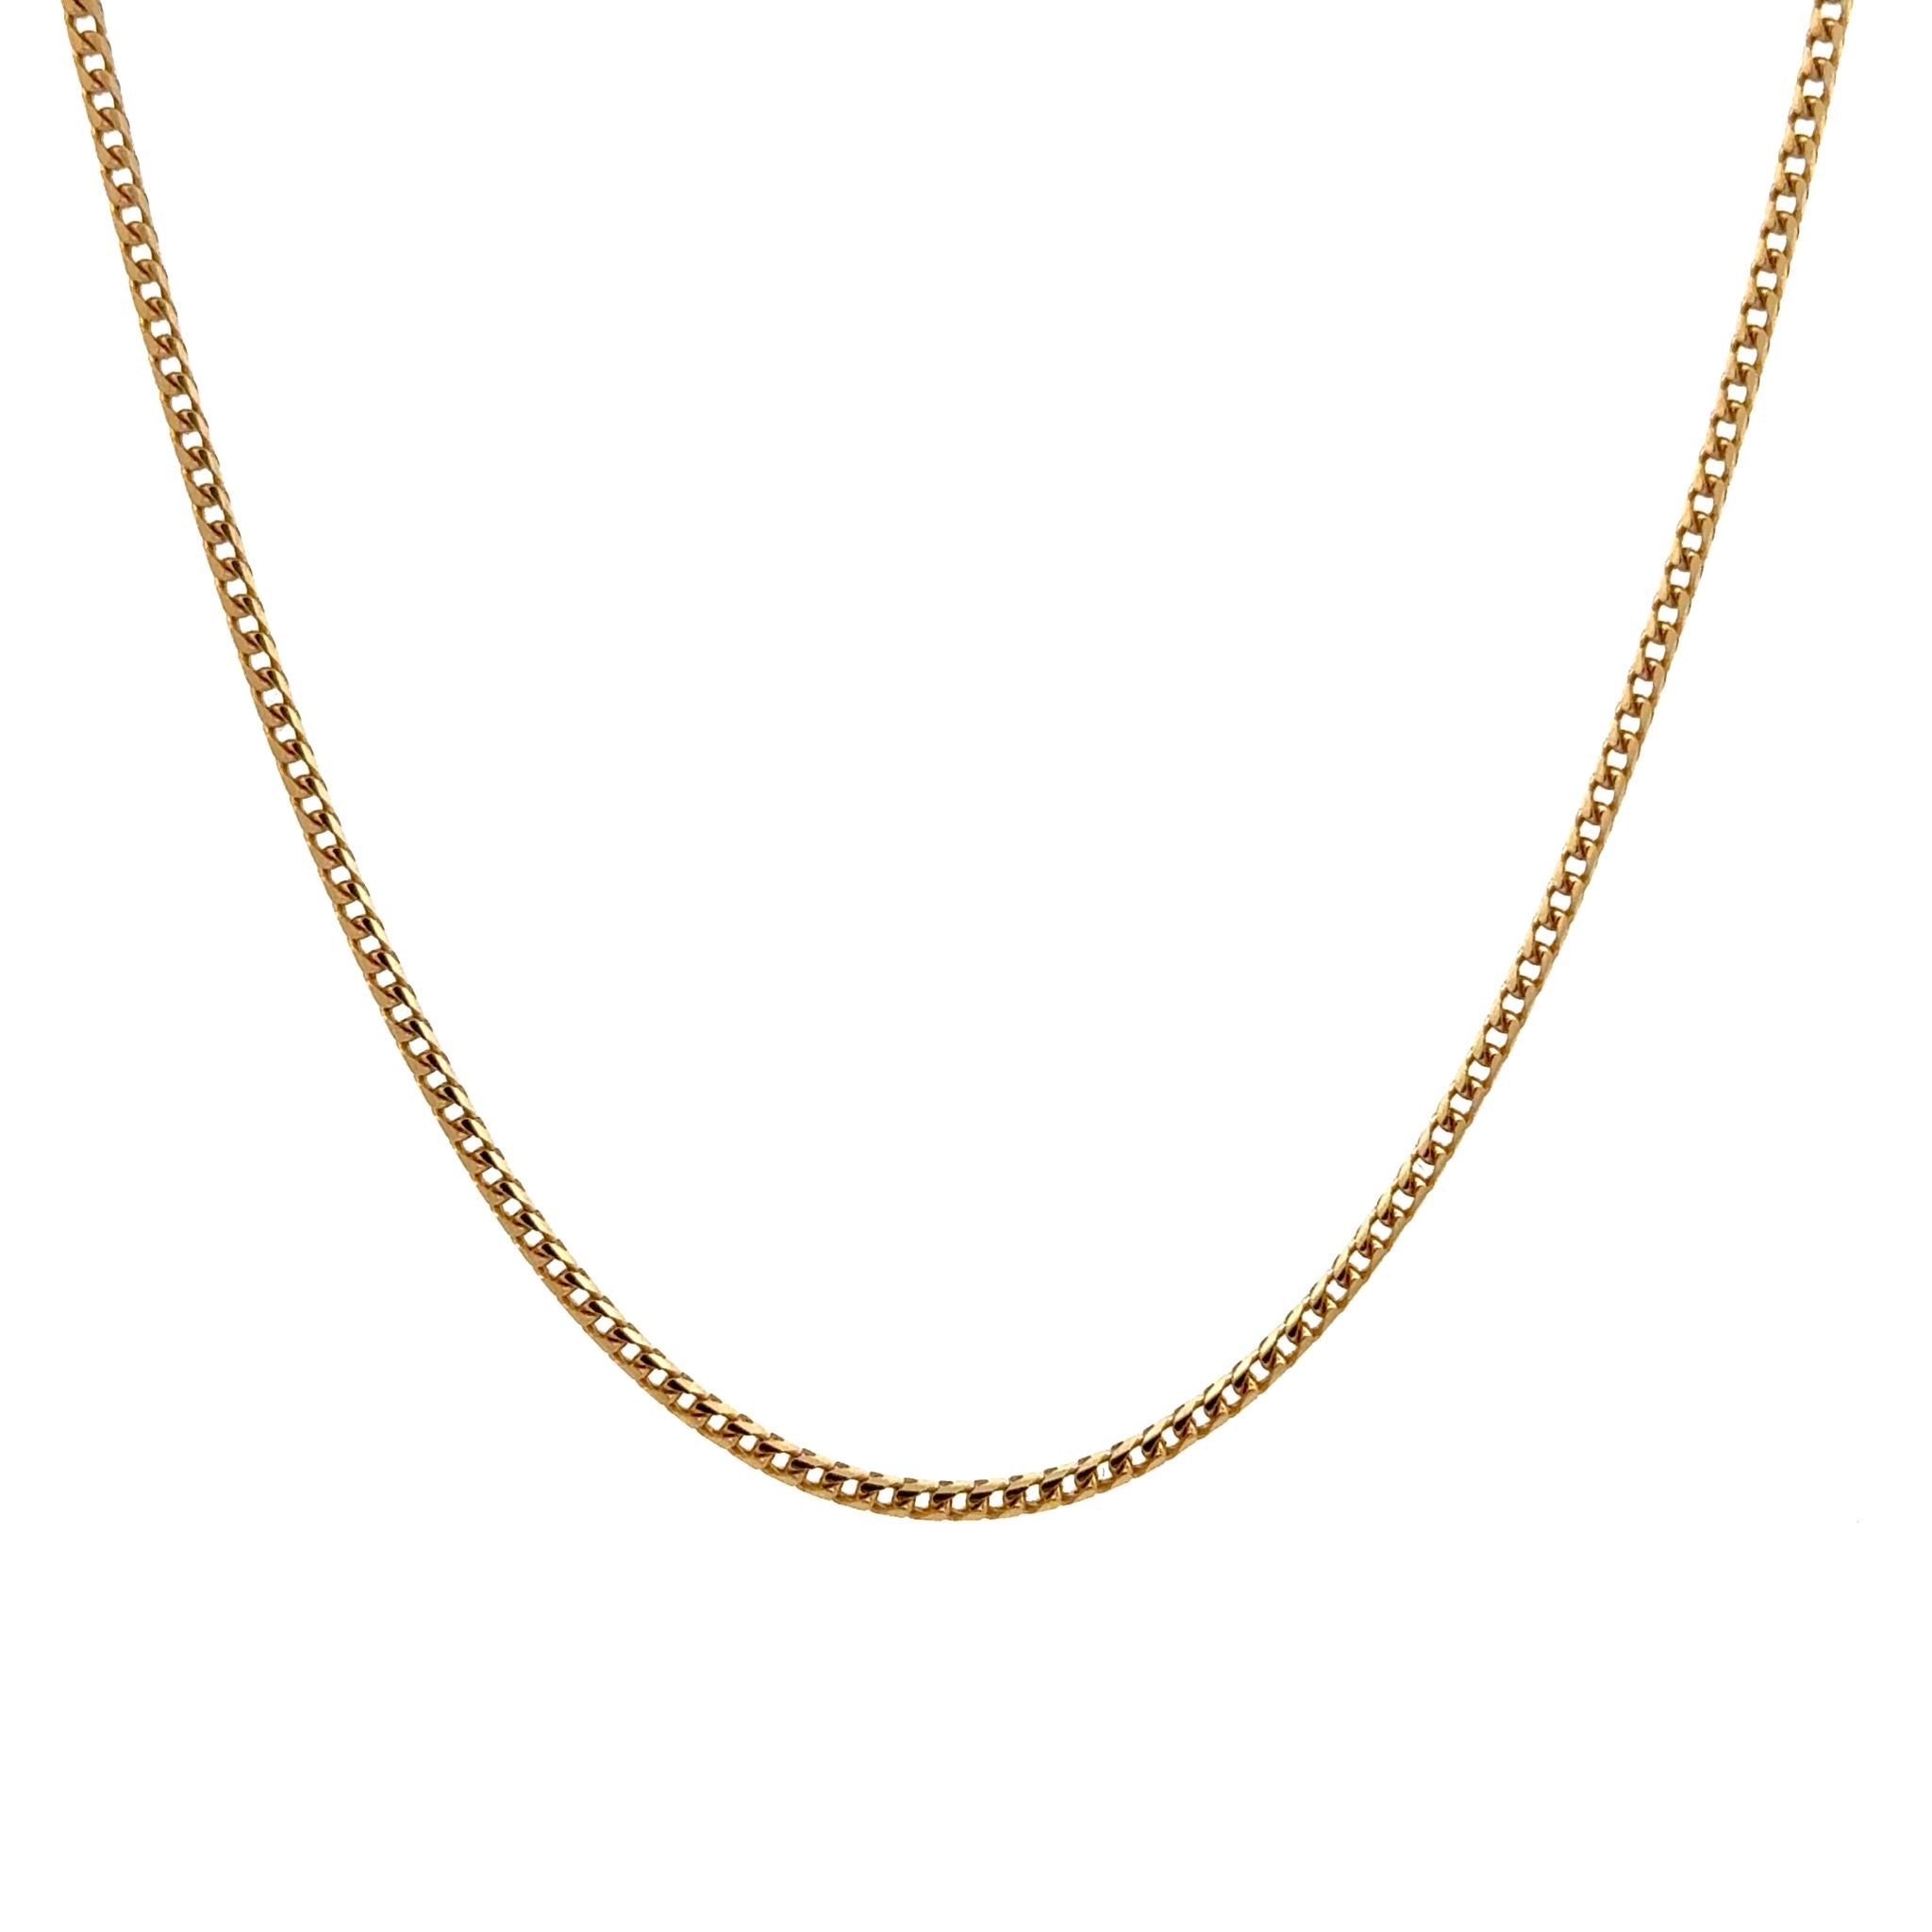 18K Yellow Gold Polished 45cm Franco Chain 1.5mm